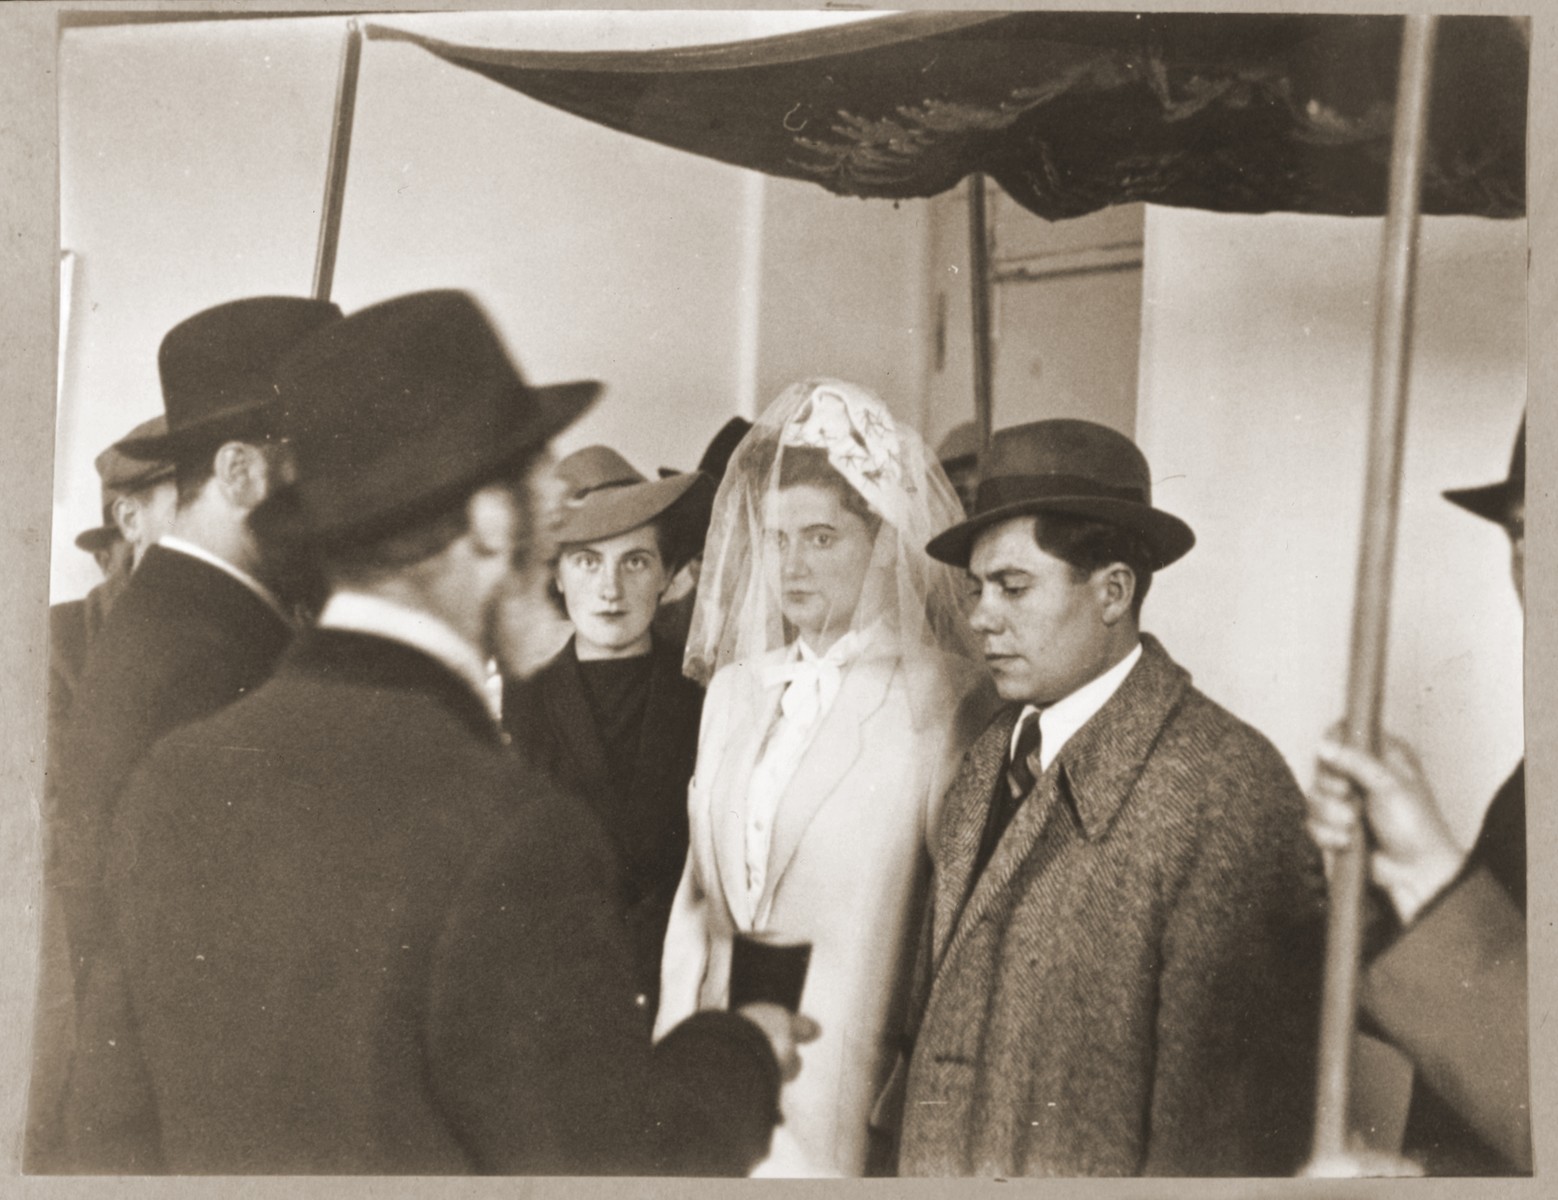 A Jewish DP couple is wed under a canopy at the Foehrenwald displaced persons camp.

The groom and bride are Sam and Regina (Gutman) Spiegel. Ester Korman is pictured in the background.